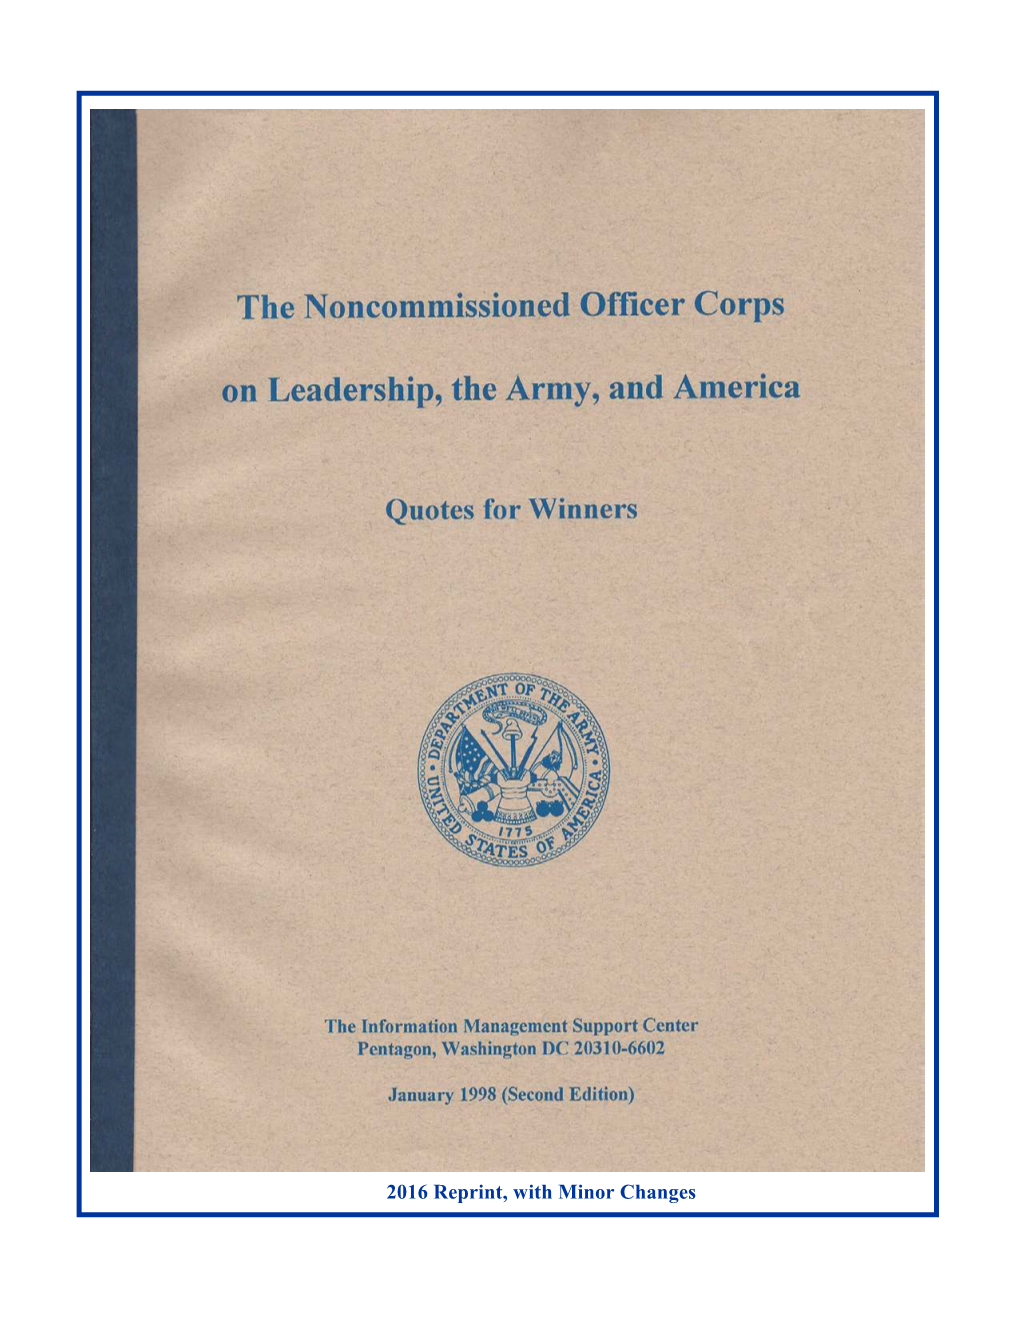 The Noncommissioned Officer Corps on Leadership, the Army, and America; and the Noncommissioned Officer Corps on Training, Cohesion, and Combat (1998 )